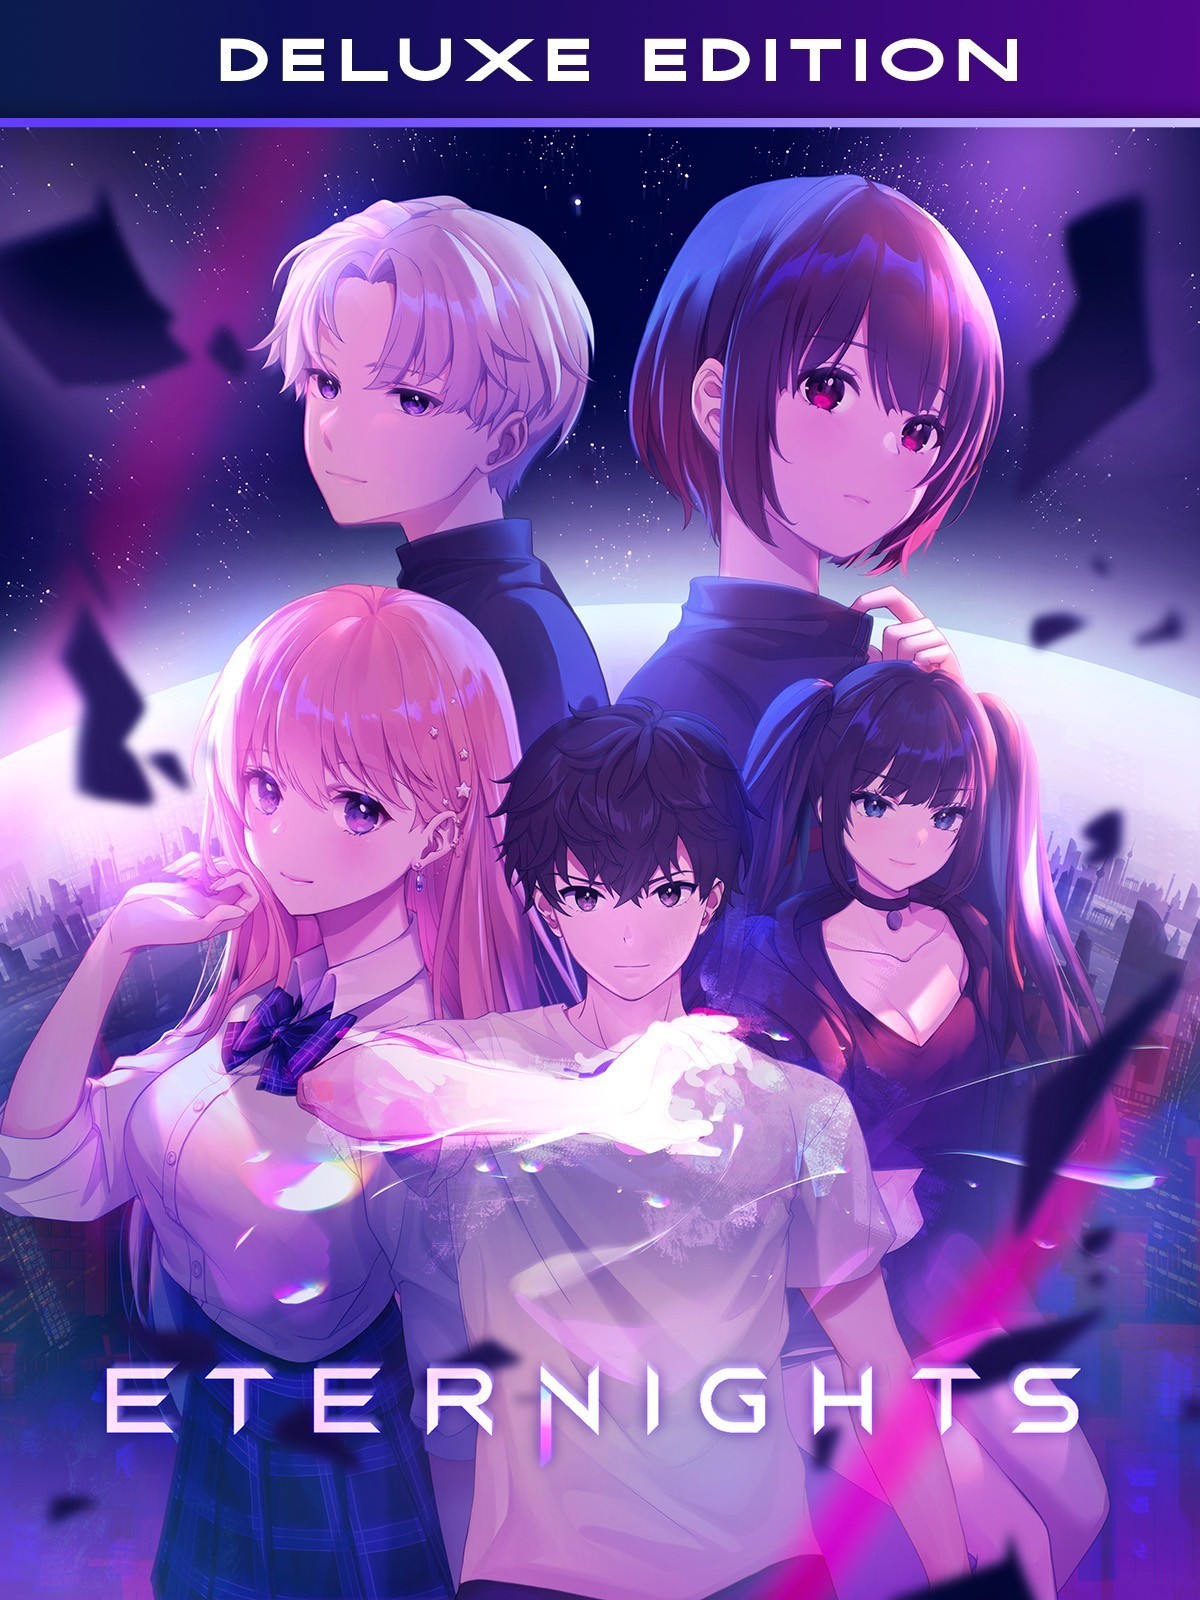 Eternights. Deluxe Edition [PC, Цифровая версия] (Цифровая версия)